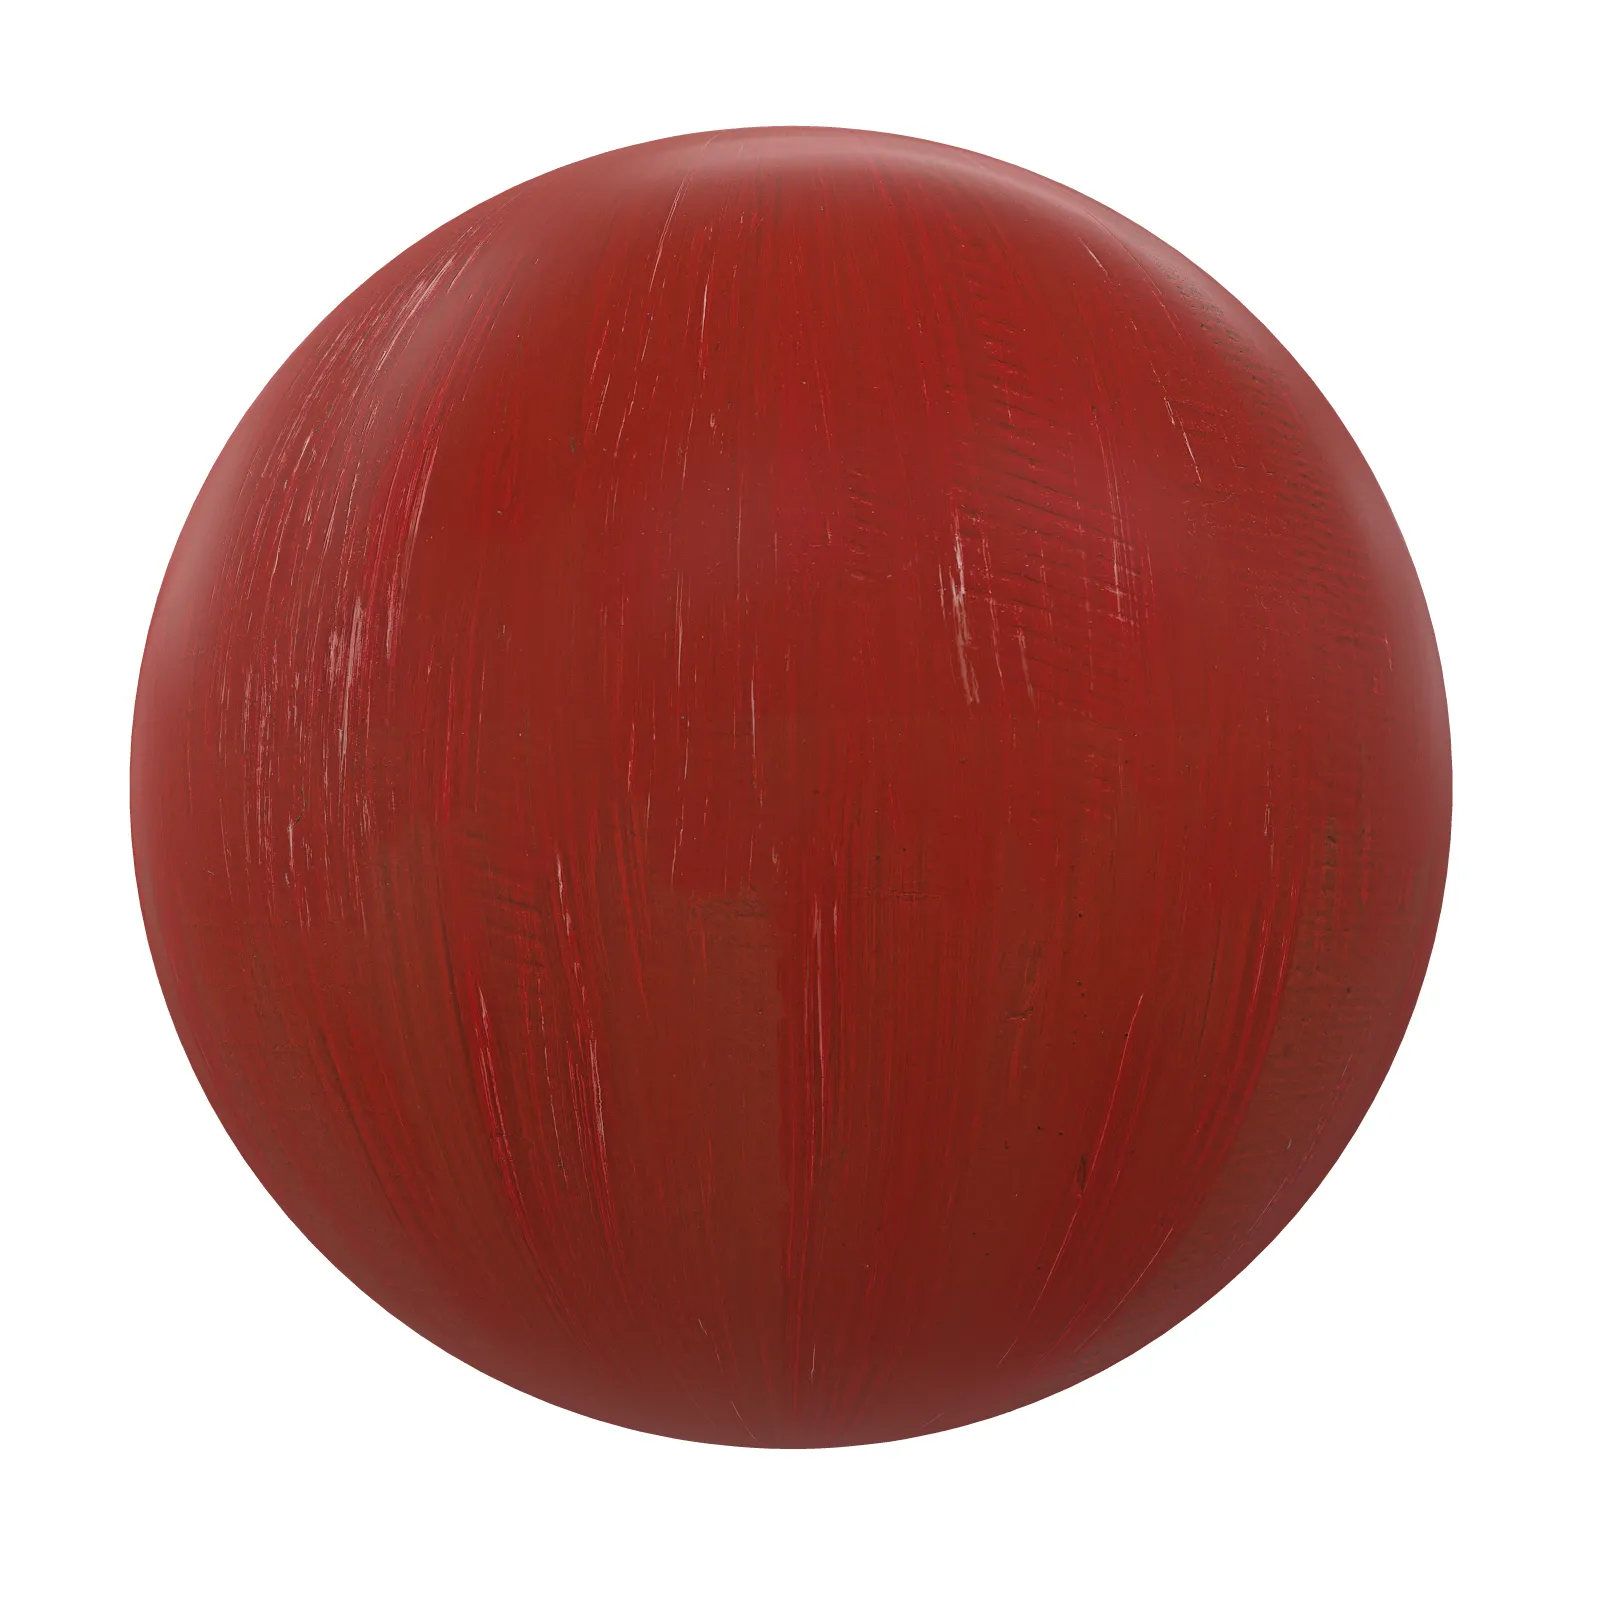 TEXTURES – WOOD – Red Painted Wood 3